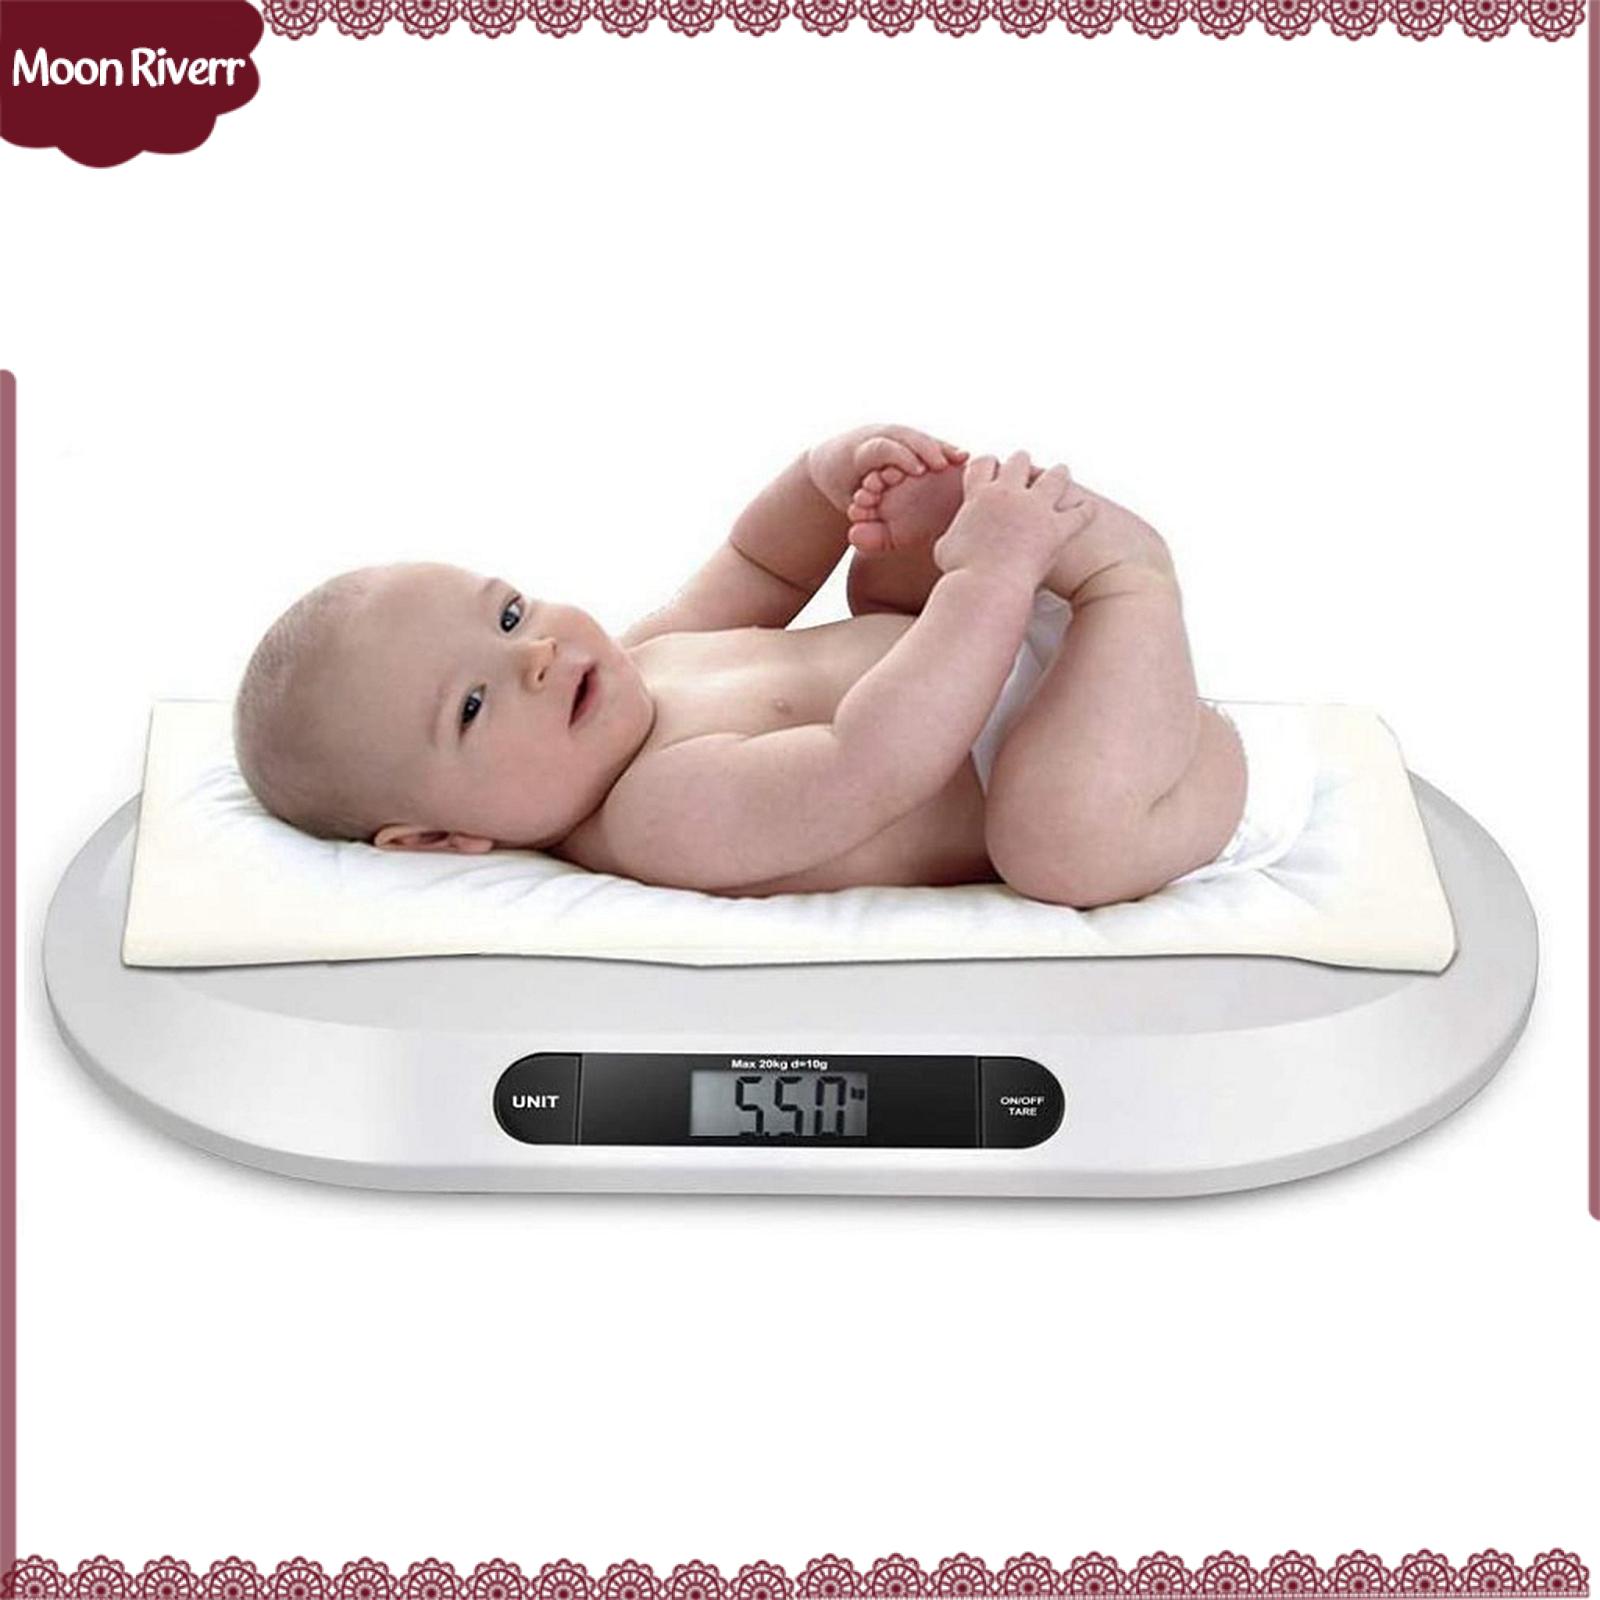 Moon Riverr Baby Scale Newborn Baby Newborn Pets Infant Scale LCD Display